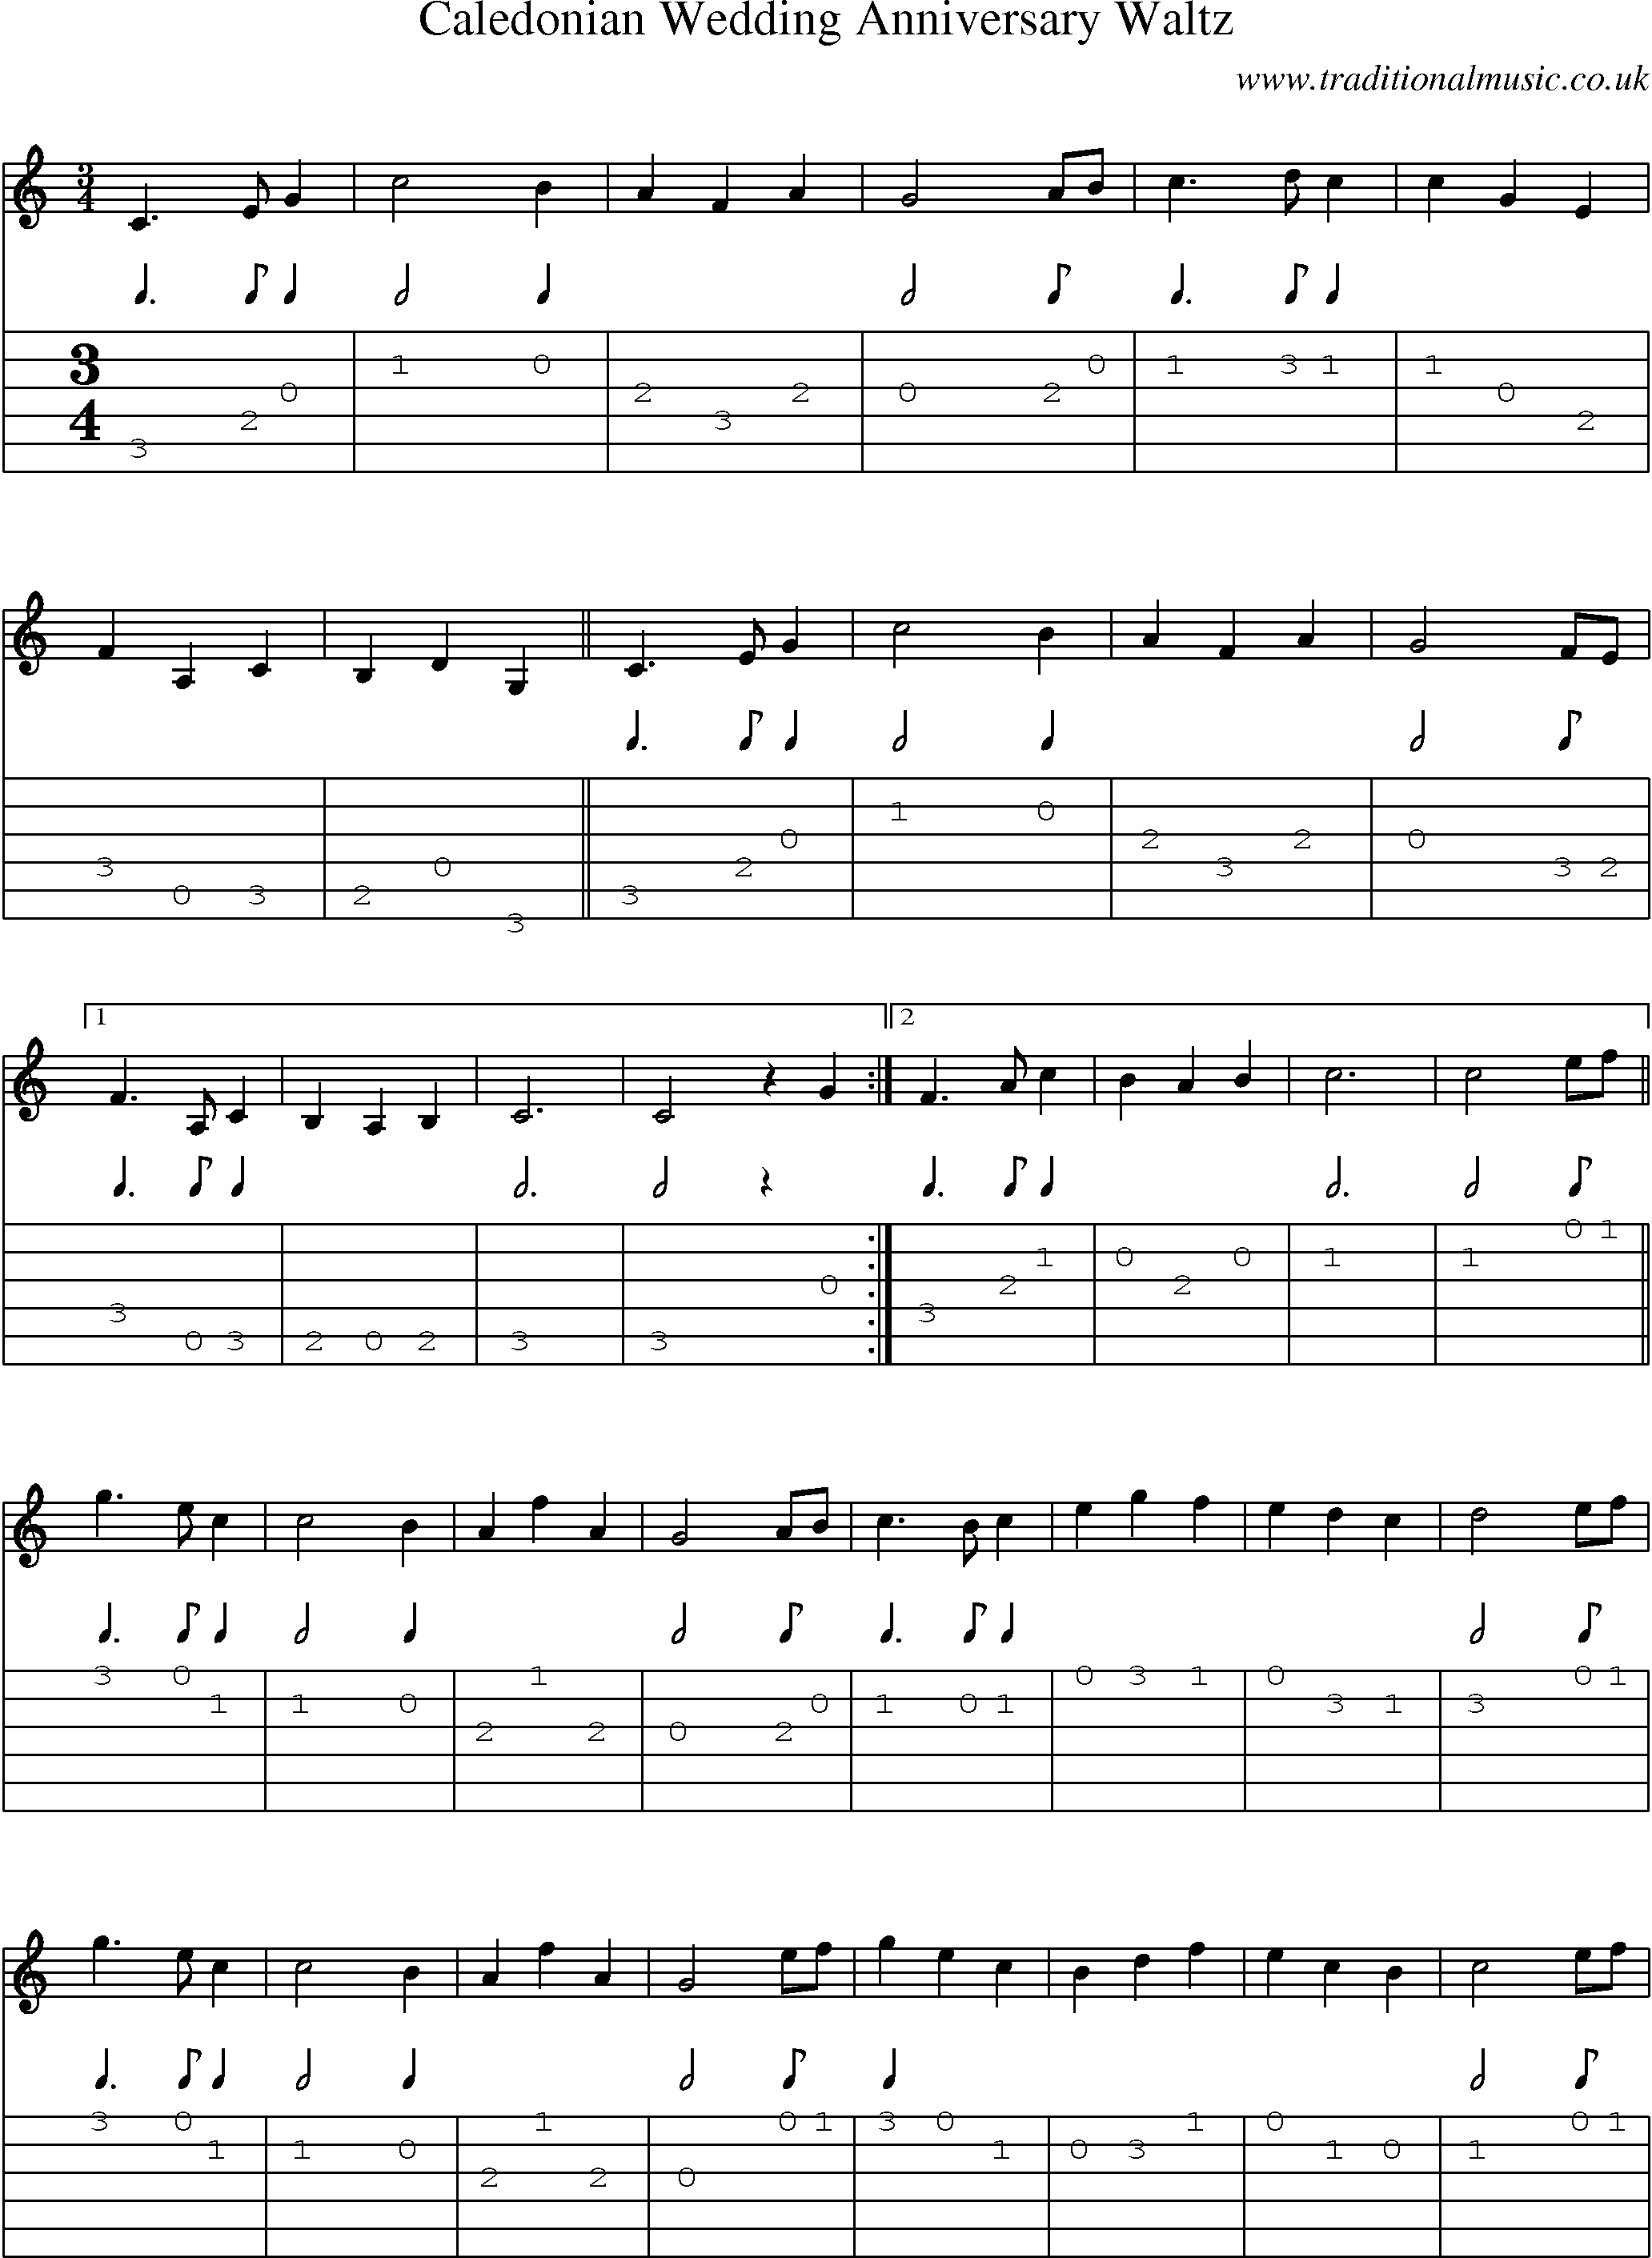 Music Score and Guitar Tabs for Caledonian Wedding Anniversary Waltz